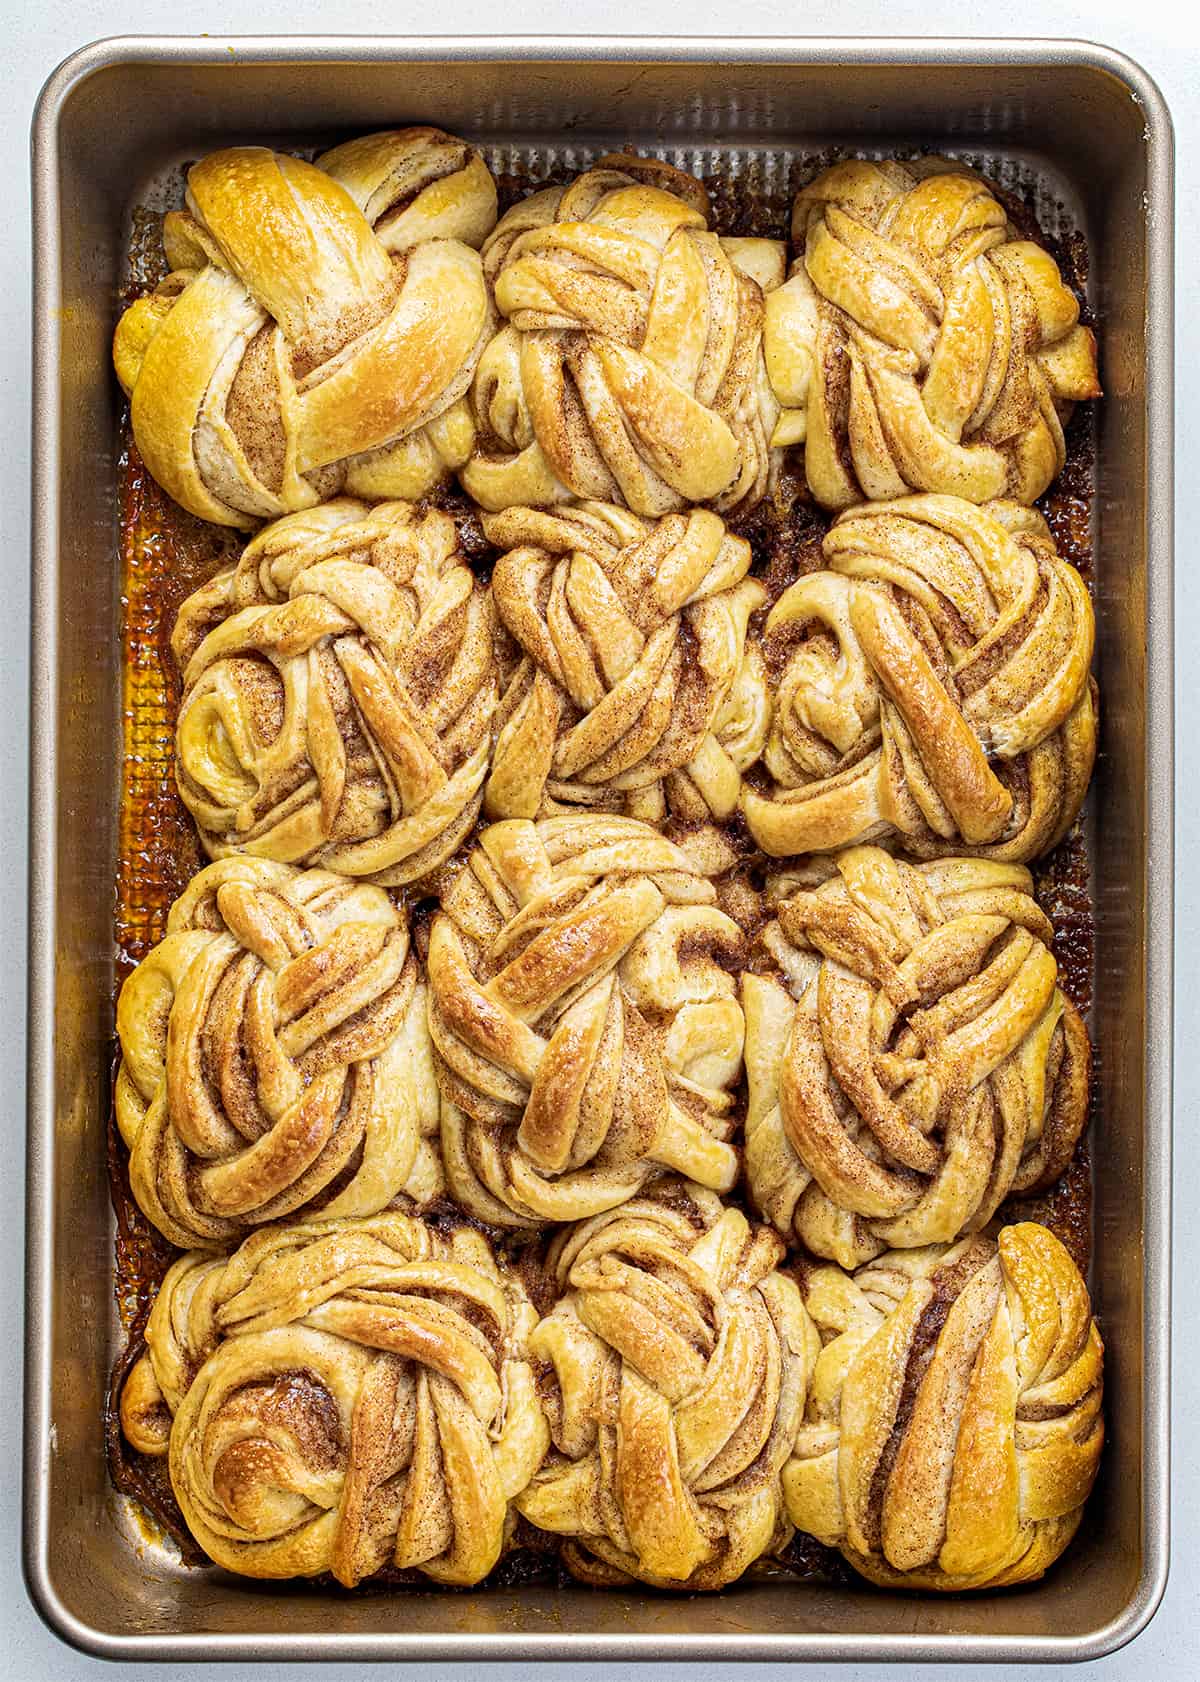 Braided Cinnamon Rolls After Baking in a Pan from Overhead on a White Counter.